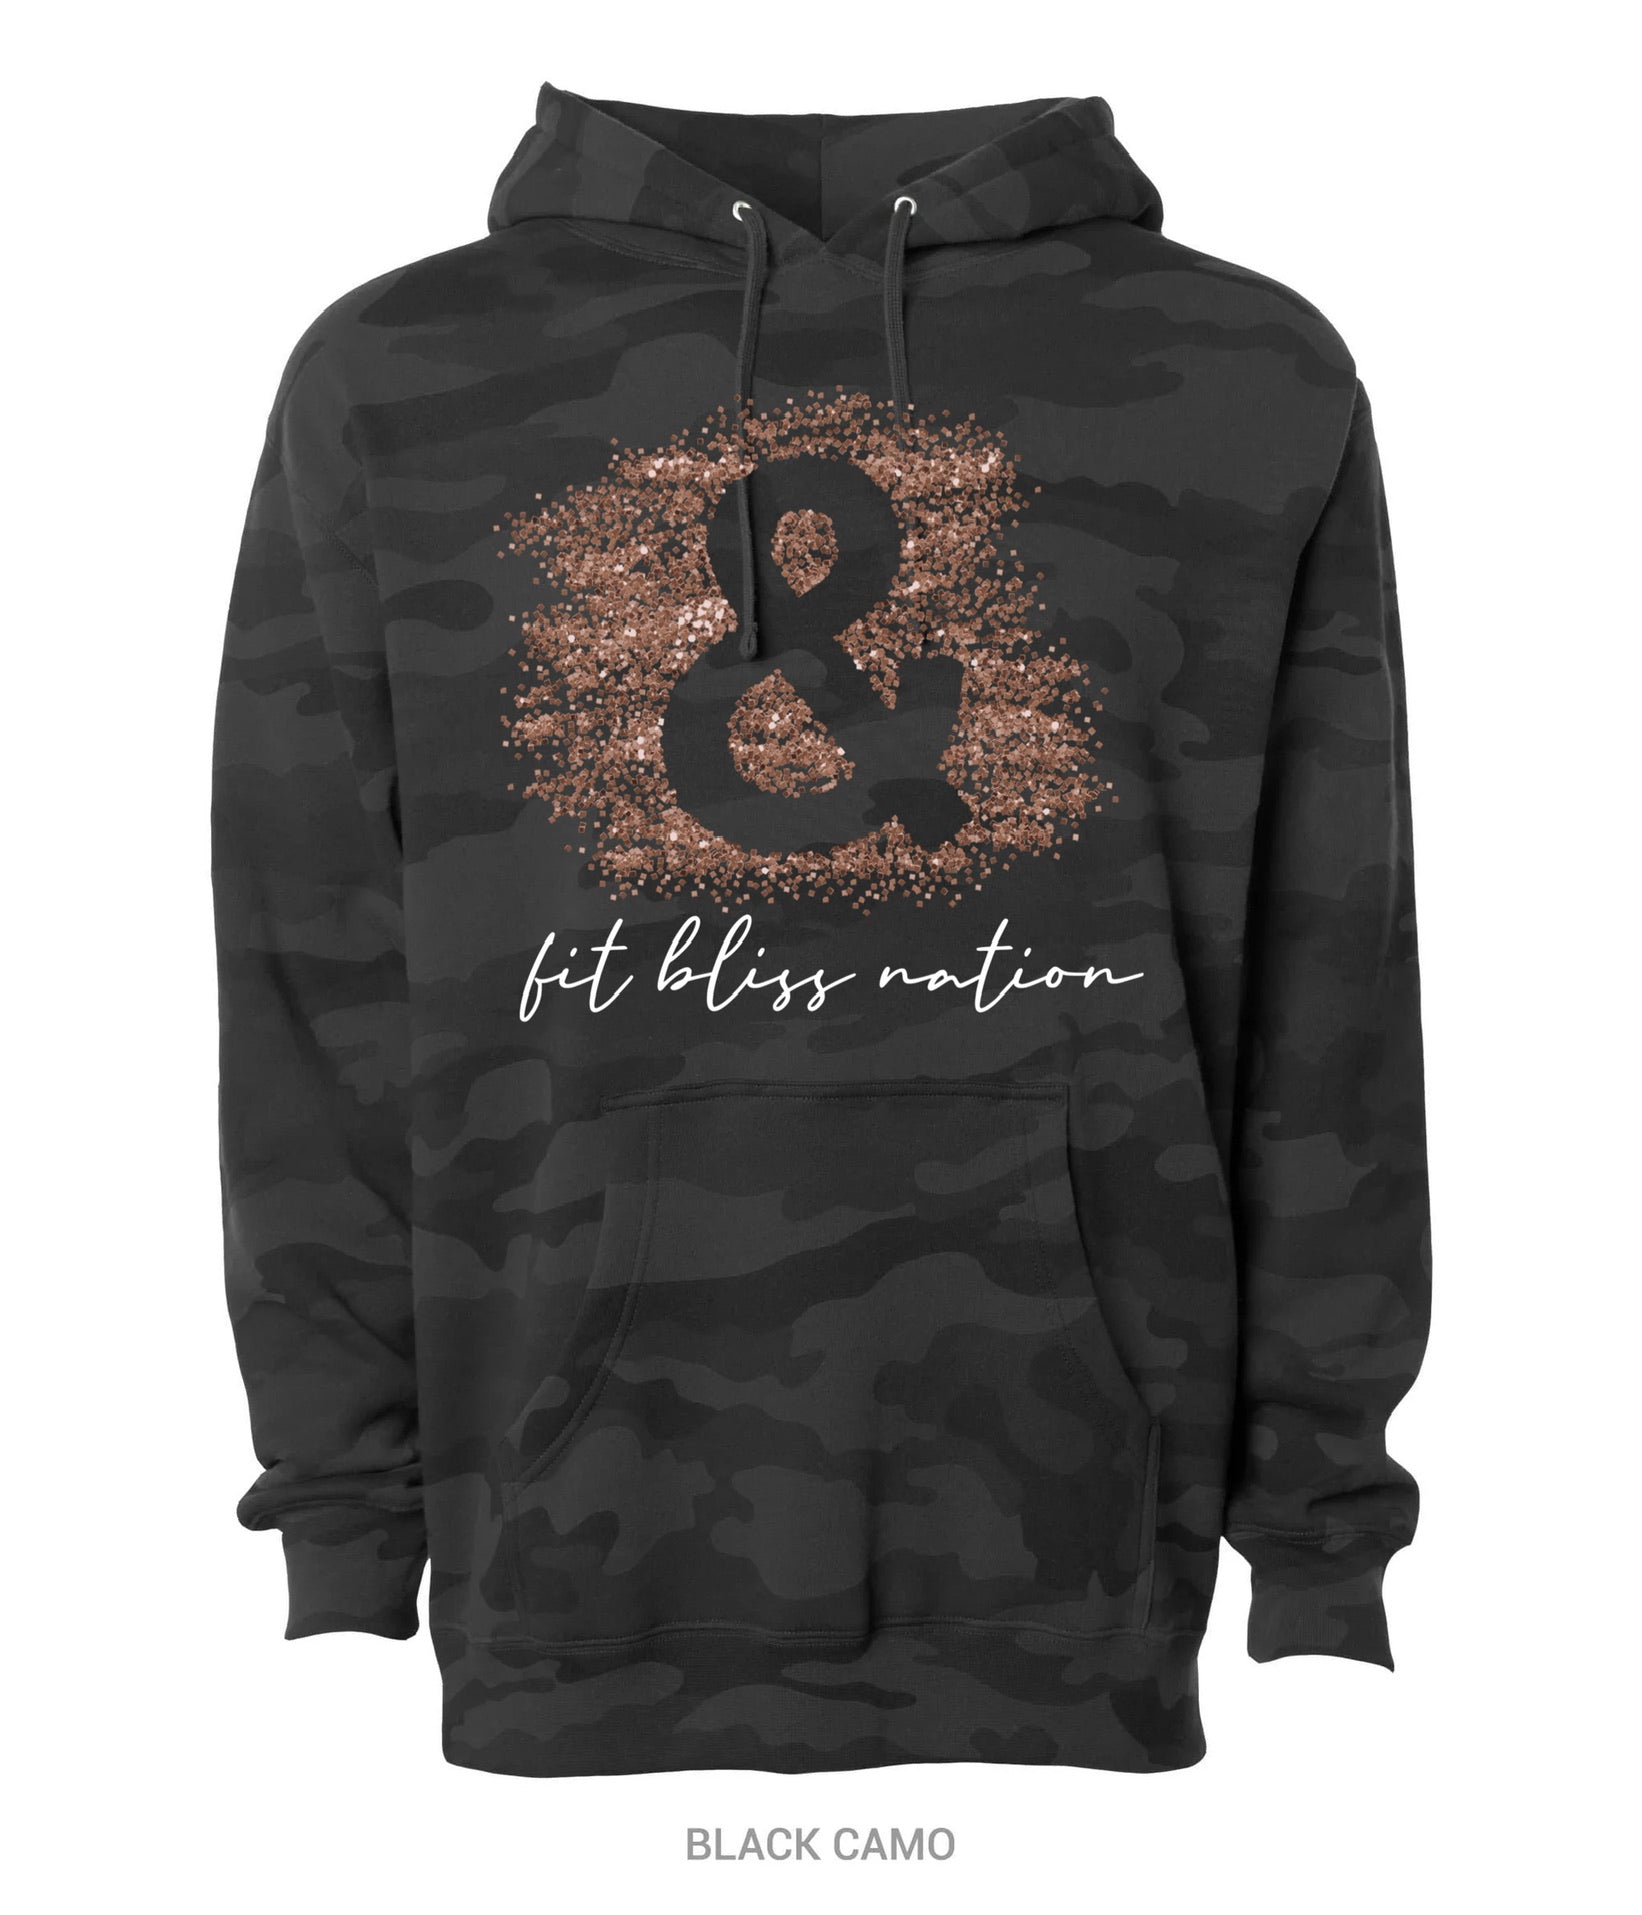 FIT BLISS NATION HOODIE